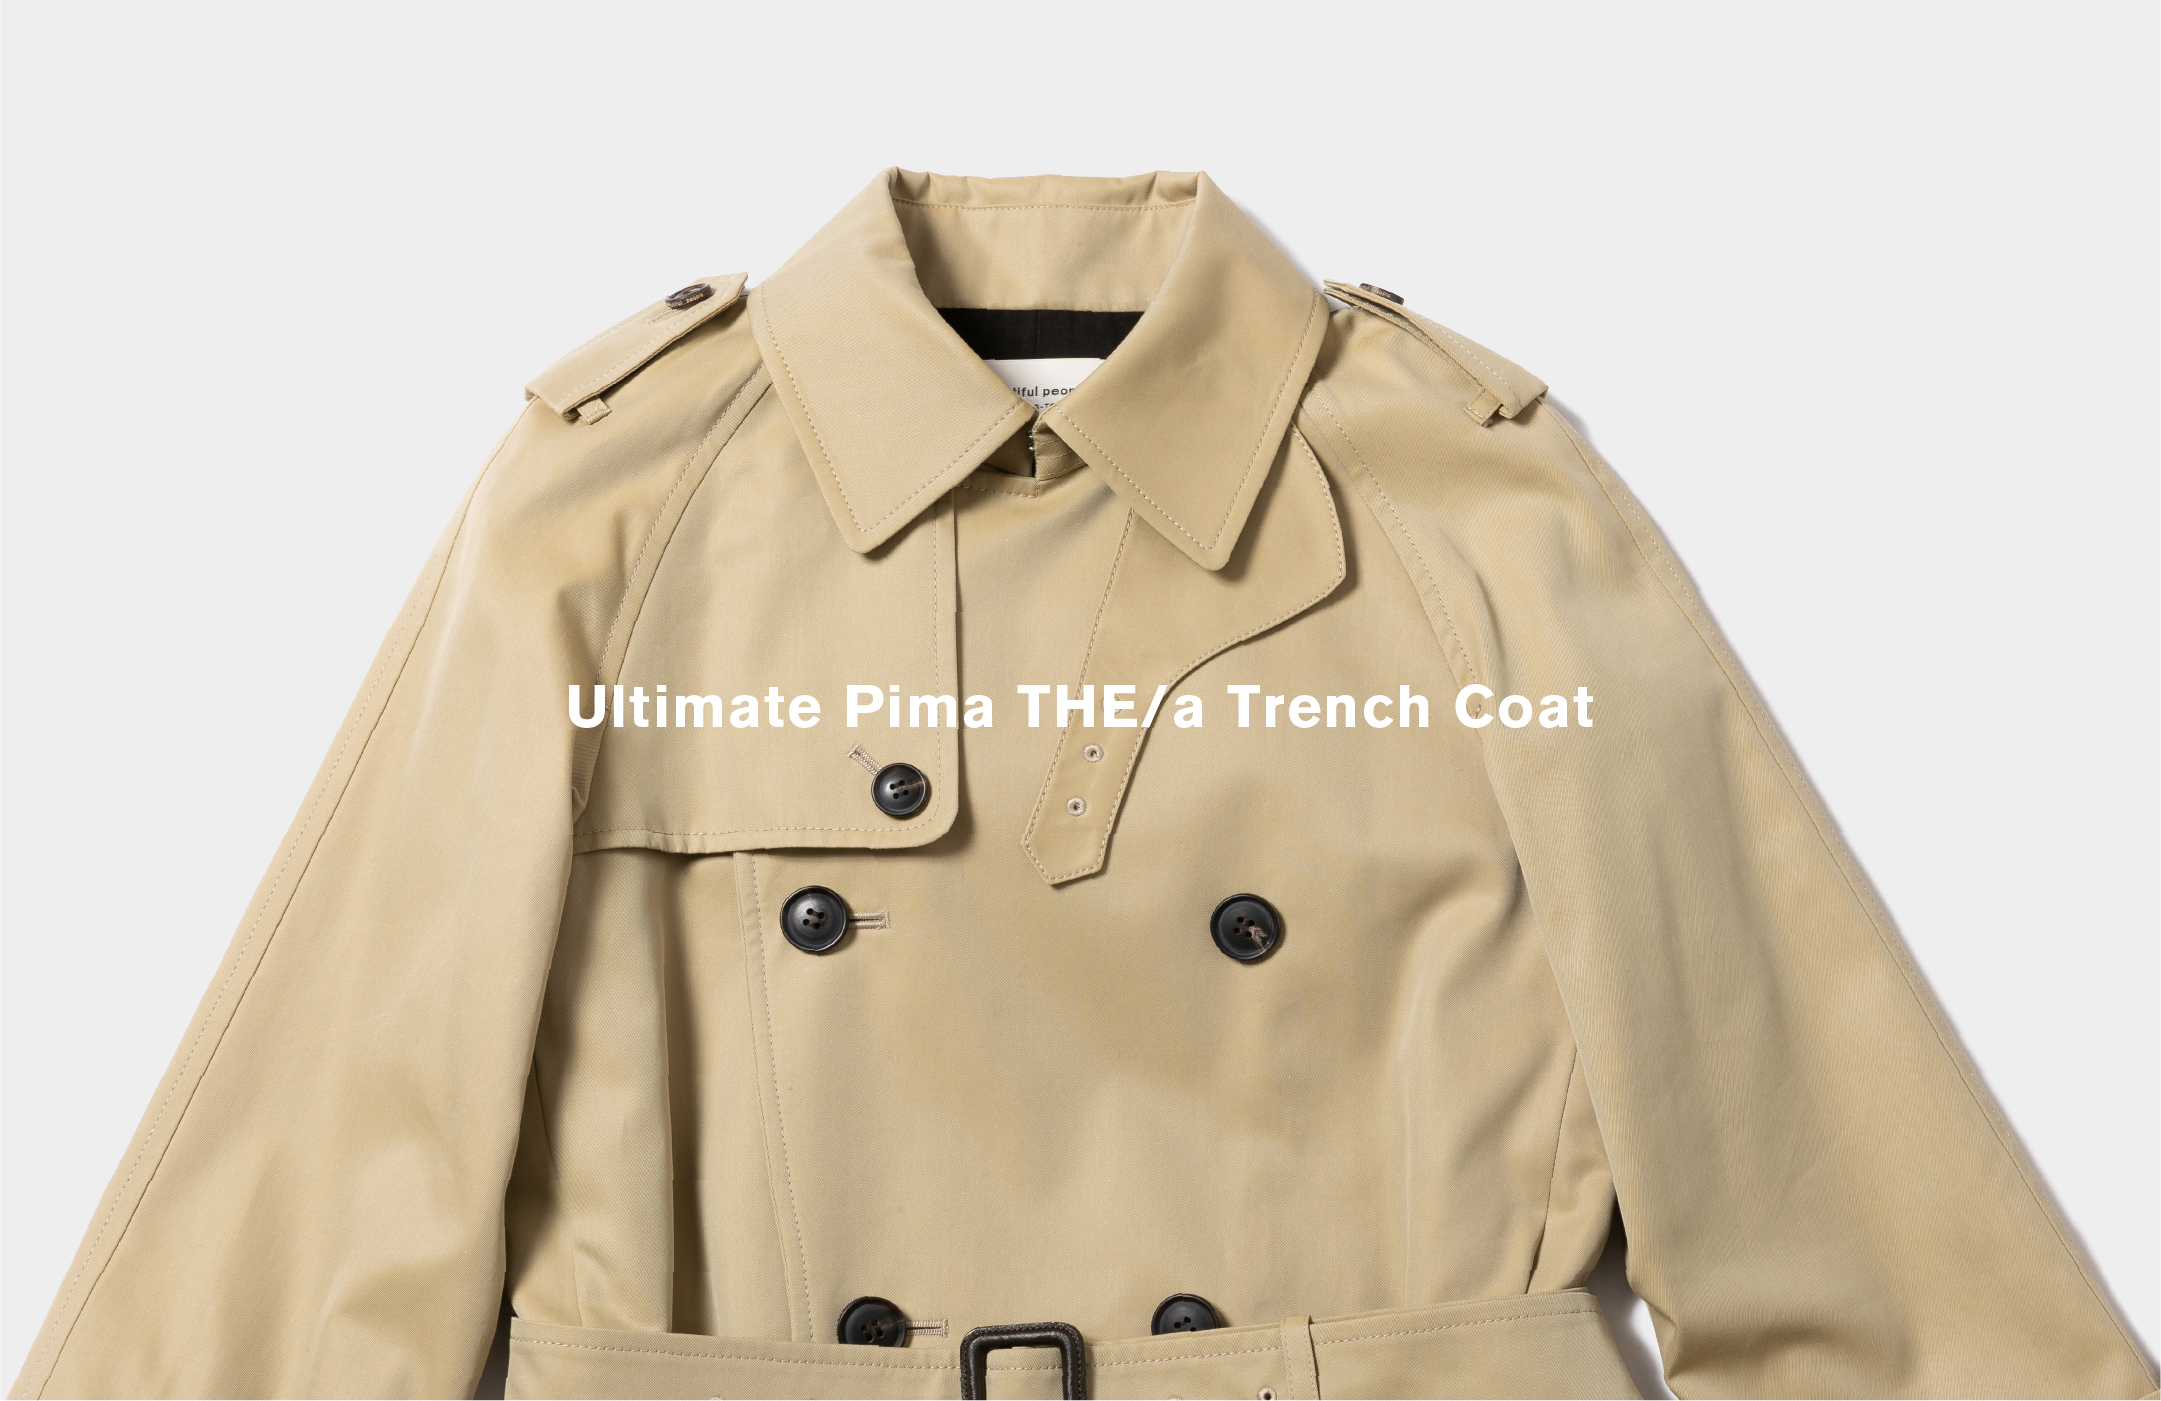 About Ultimate Pima THE / a Trench Coat | beautiful people